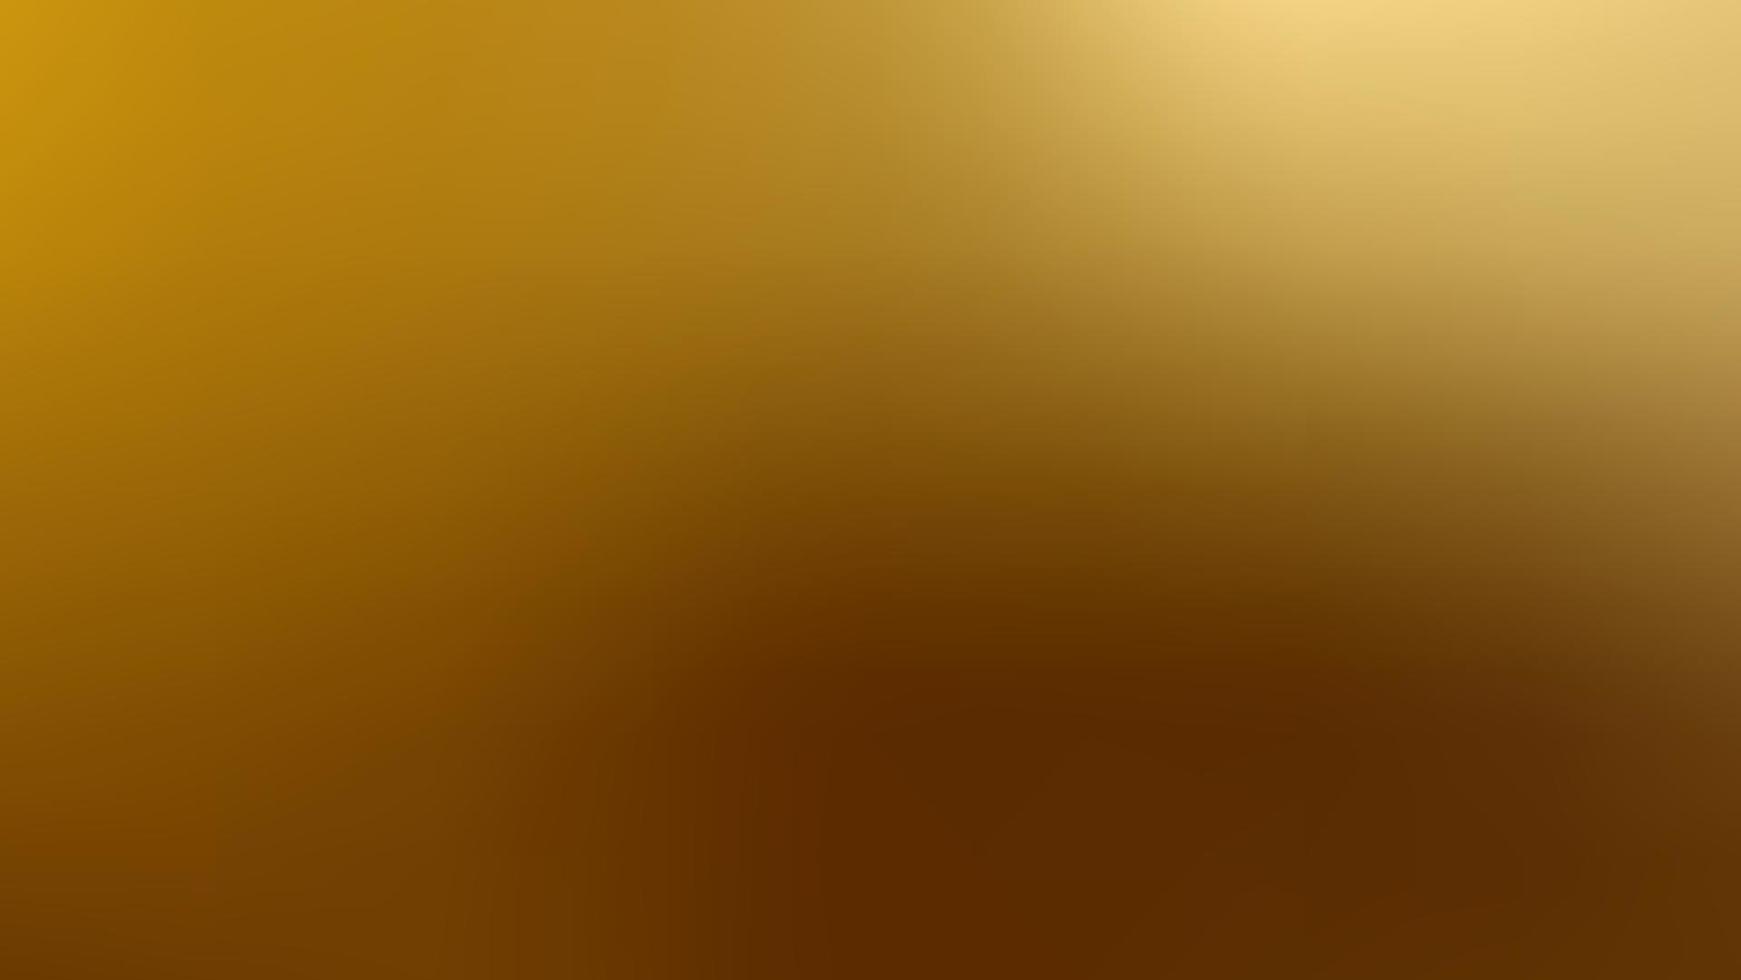 gold color background with blur and smooth texture for festive metallic graphic design element vector